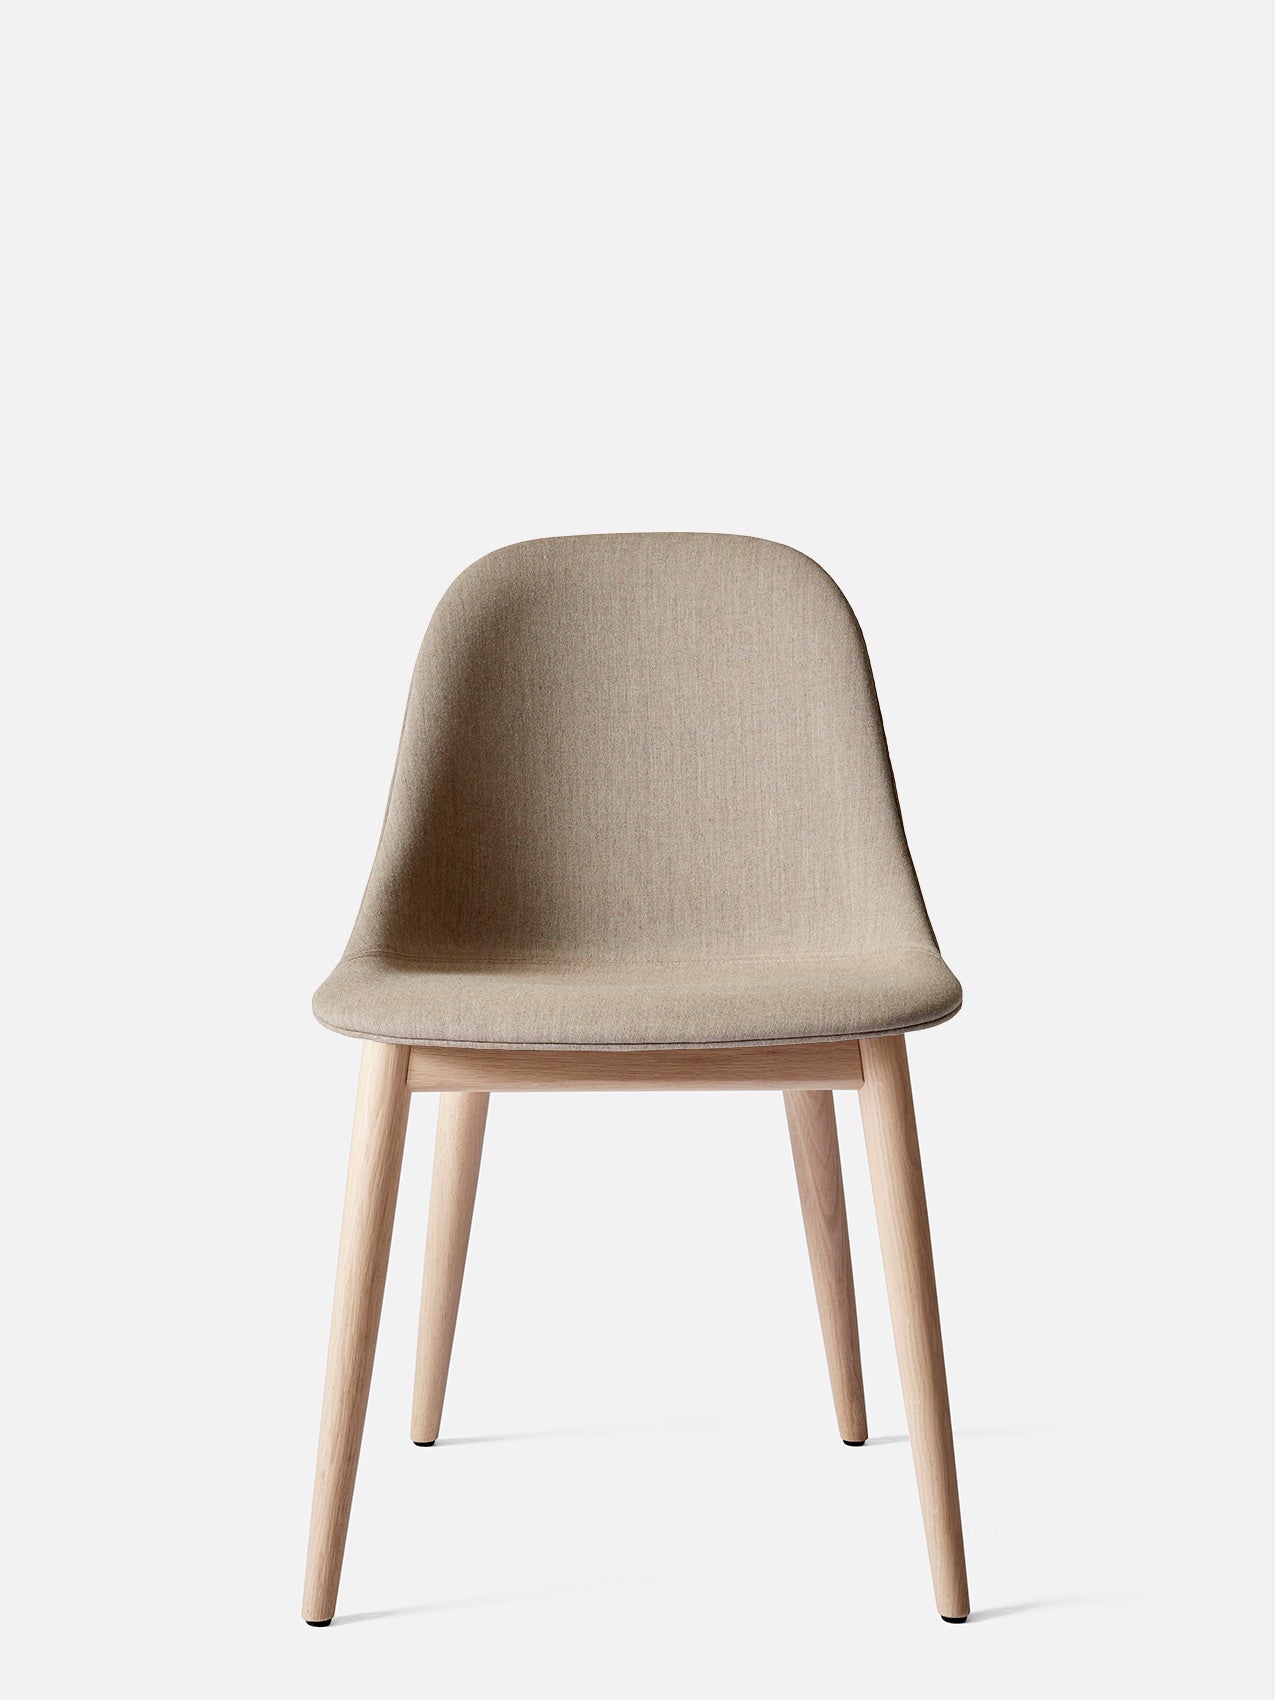 Harbour Side Chair, Upholstered-Chair-Norm Architects-Dining Height (Seat 17.7in H)/Natural Oak-233/Remix3-menu-minimalist-modern-danish-design-home-decor